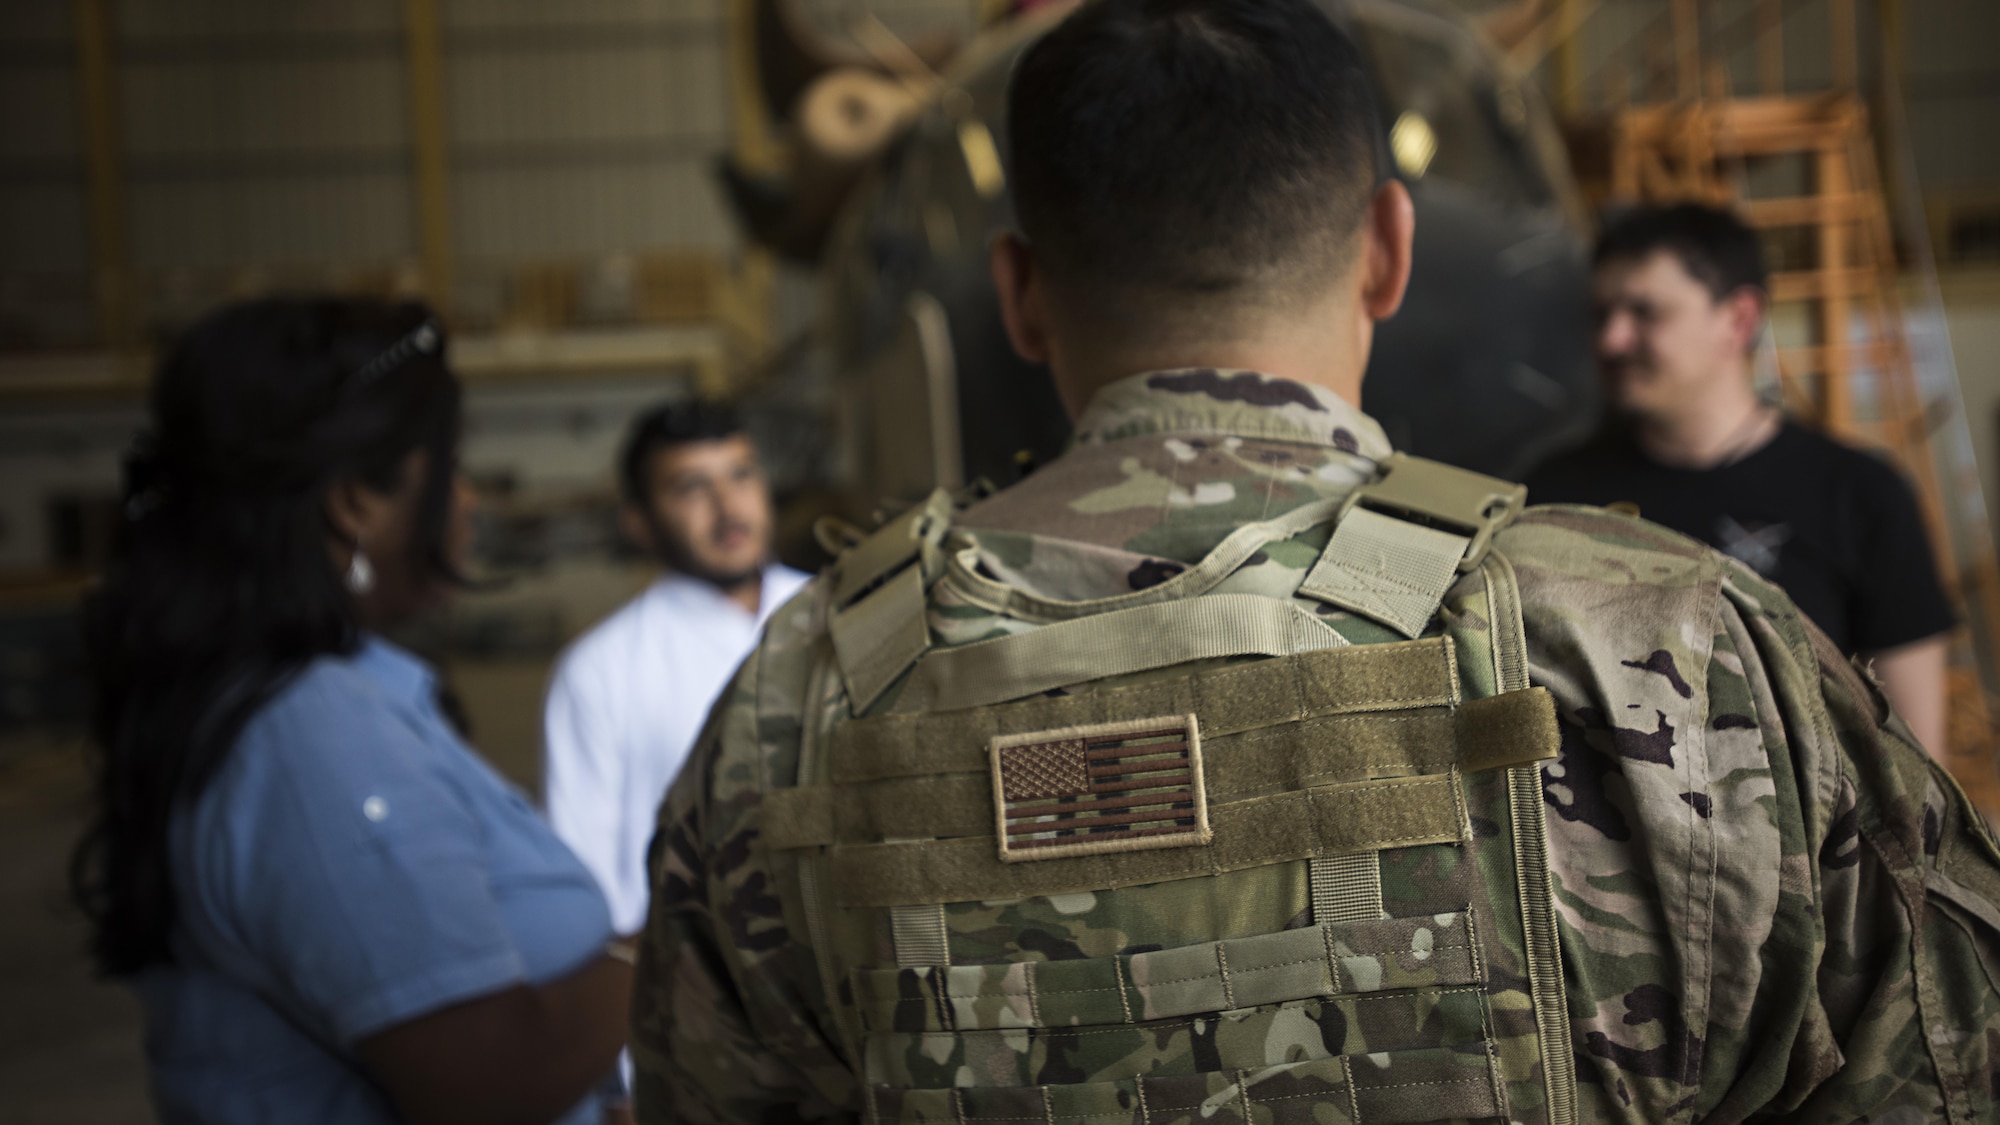 Tech. Sgt. Hector Flores, 738th Air Expeditionary Advisory Group guardian angel, provides armed overwatch for contractors and air advisors performing maintenance on an Afghan Air Force Mi-17 Military Transport Helicopter April 16, 2017, at Kandahar Air Wing, Afghanistan. Flores is deployed with other Citizen Airmen from the 507th Security Forces Squadron, Tinker Air Force Base, Okla. (U.S. Air Force photo/Staff Sgt. Katherine Spessa)